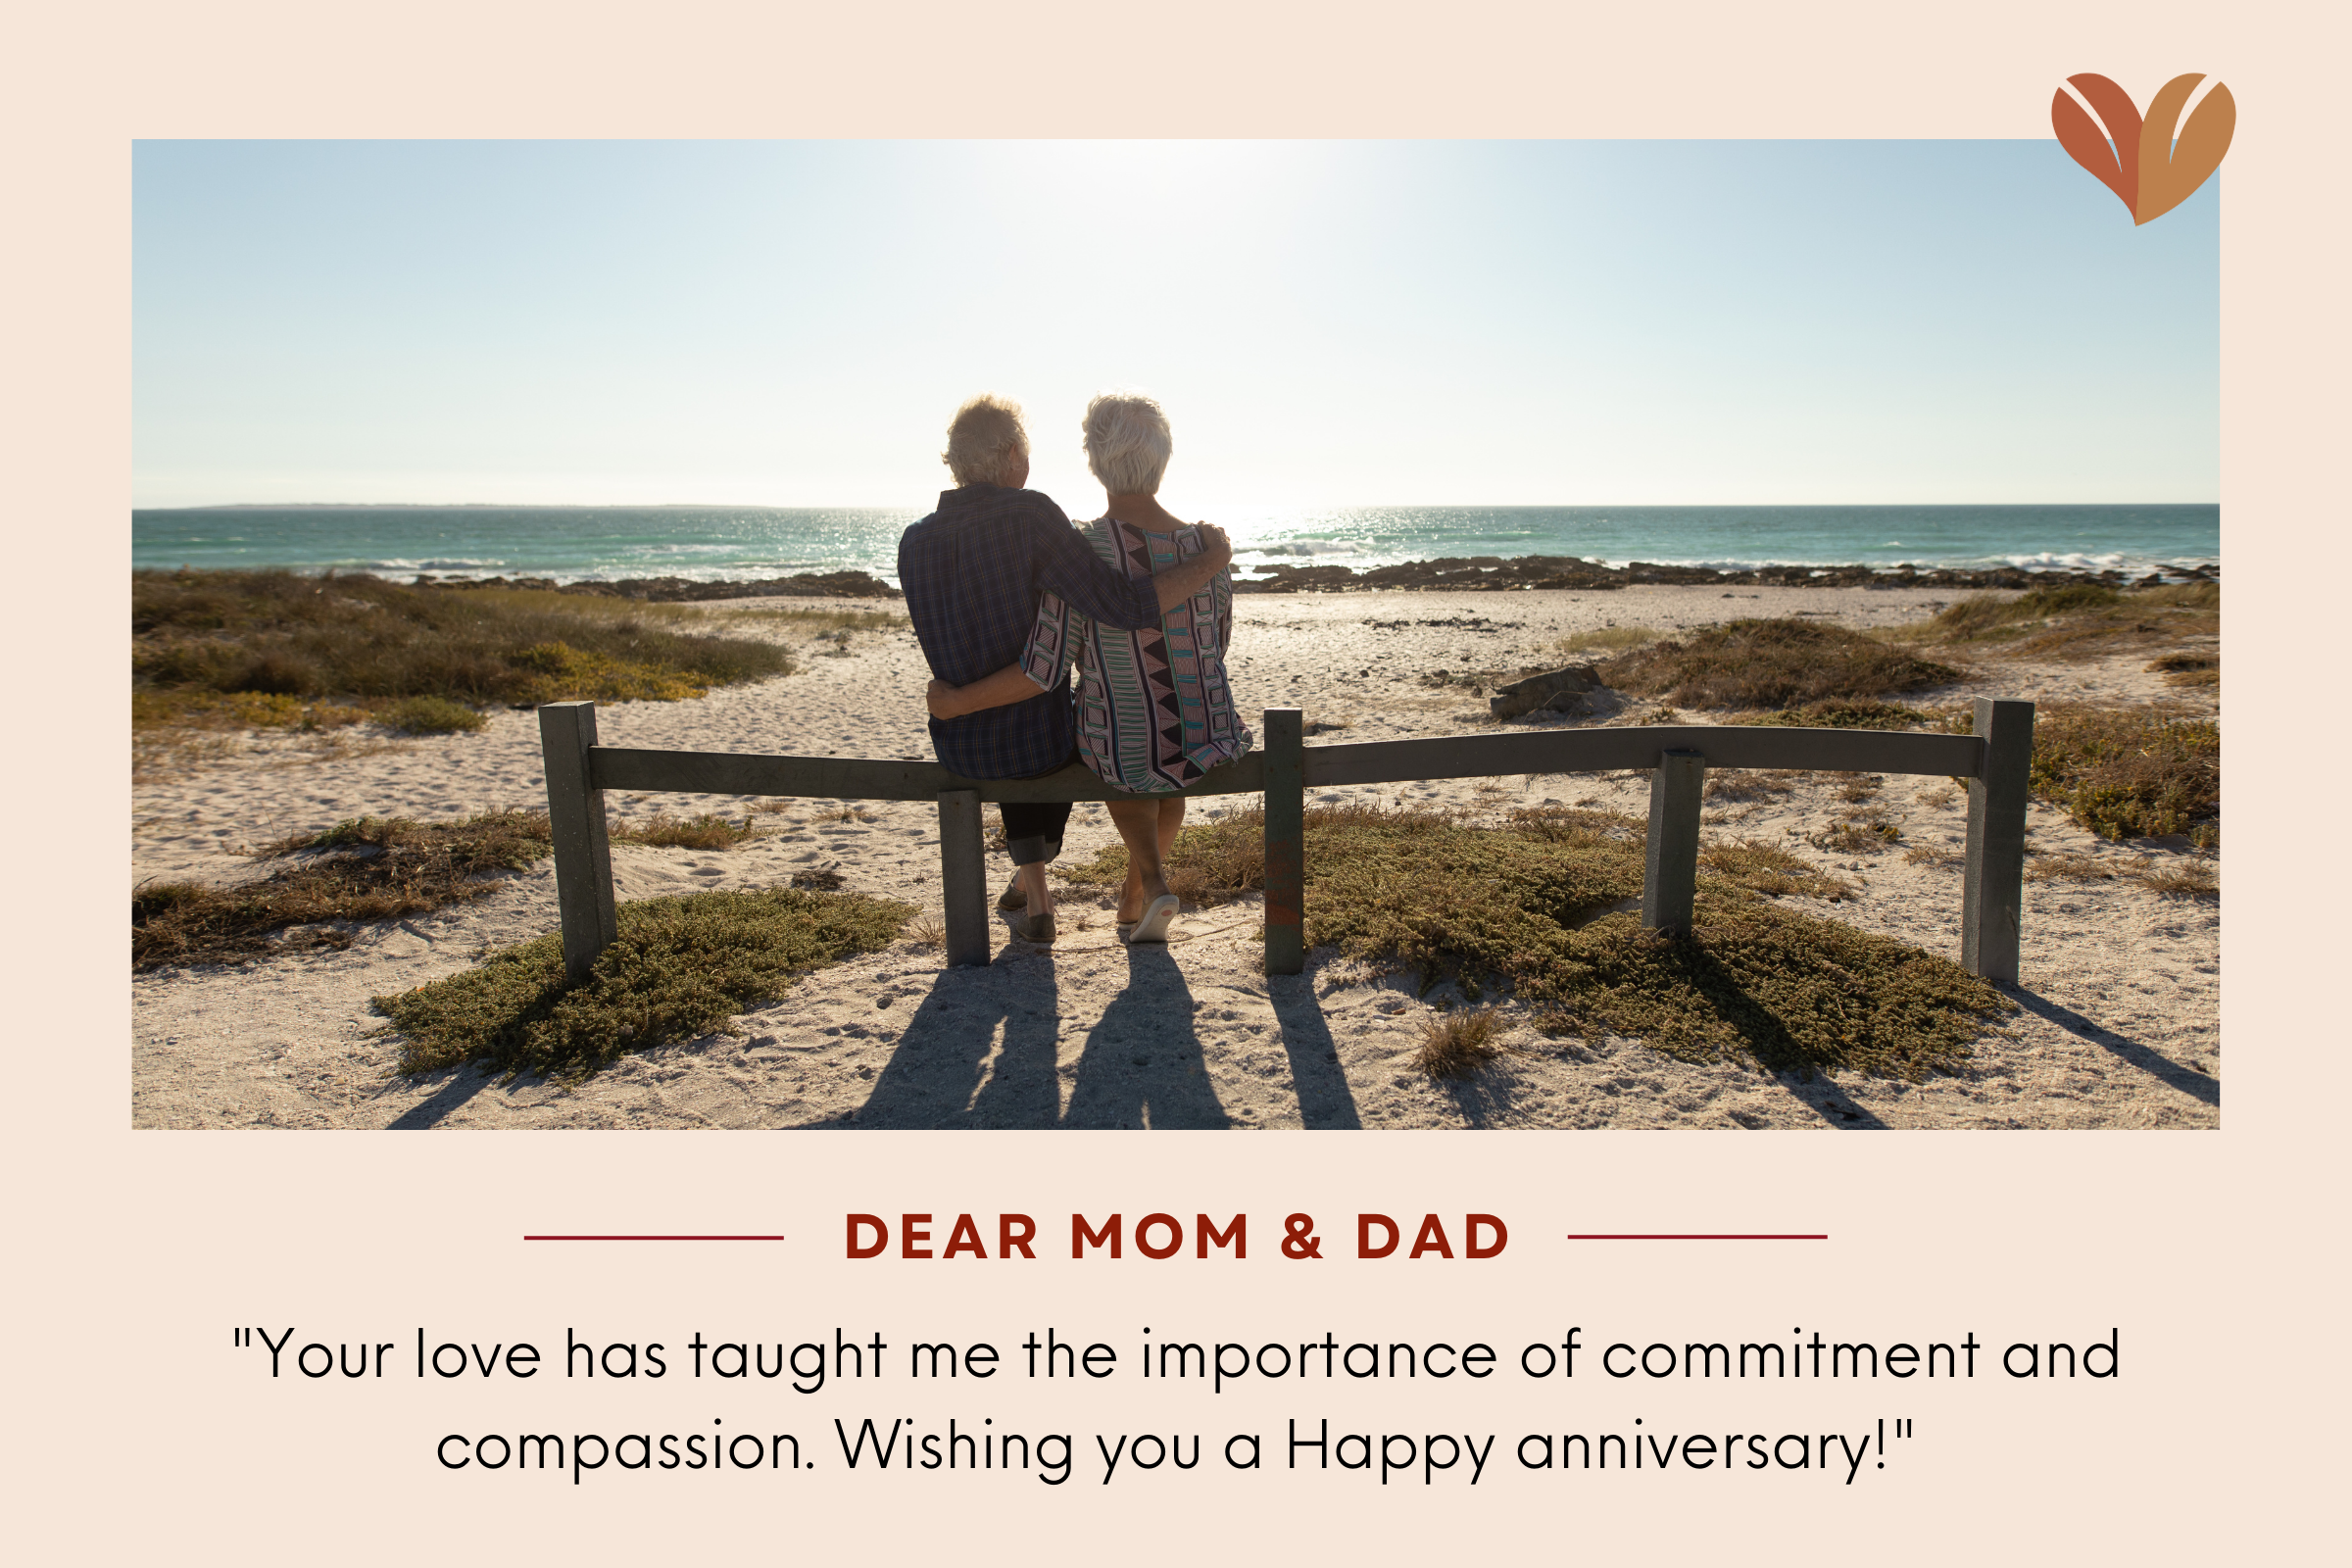 Simple wishes will make parents happier than ever.